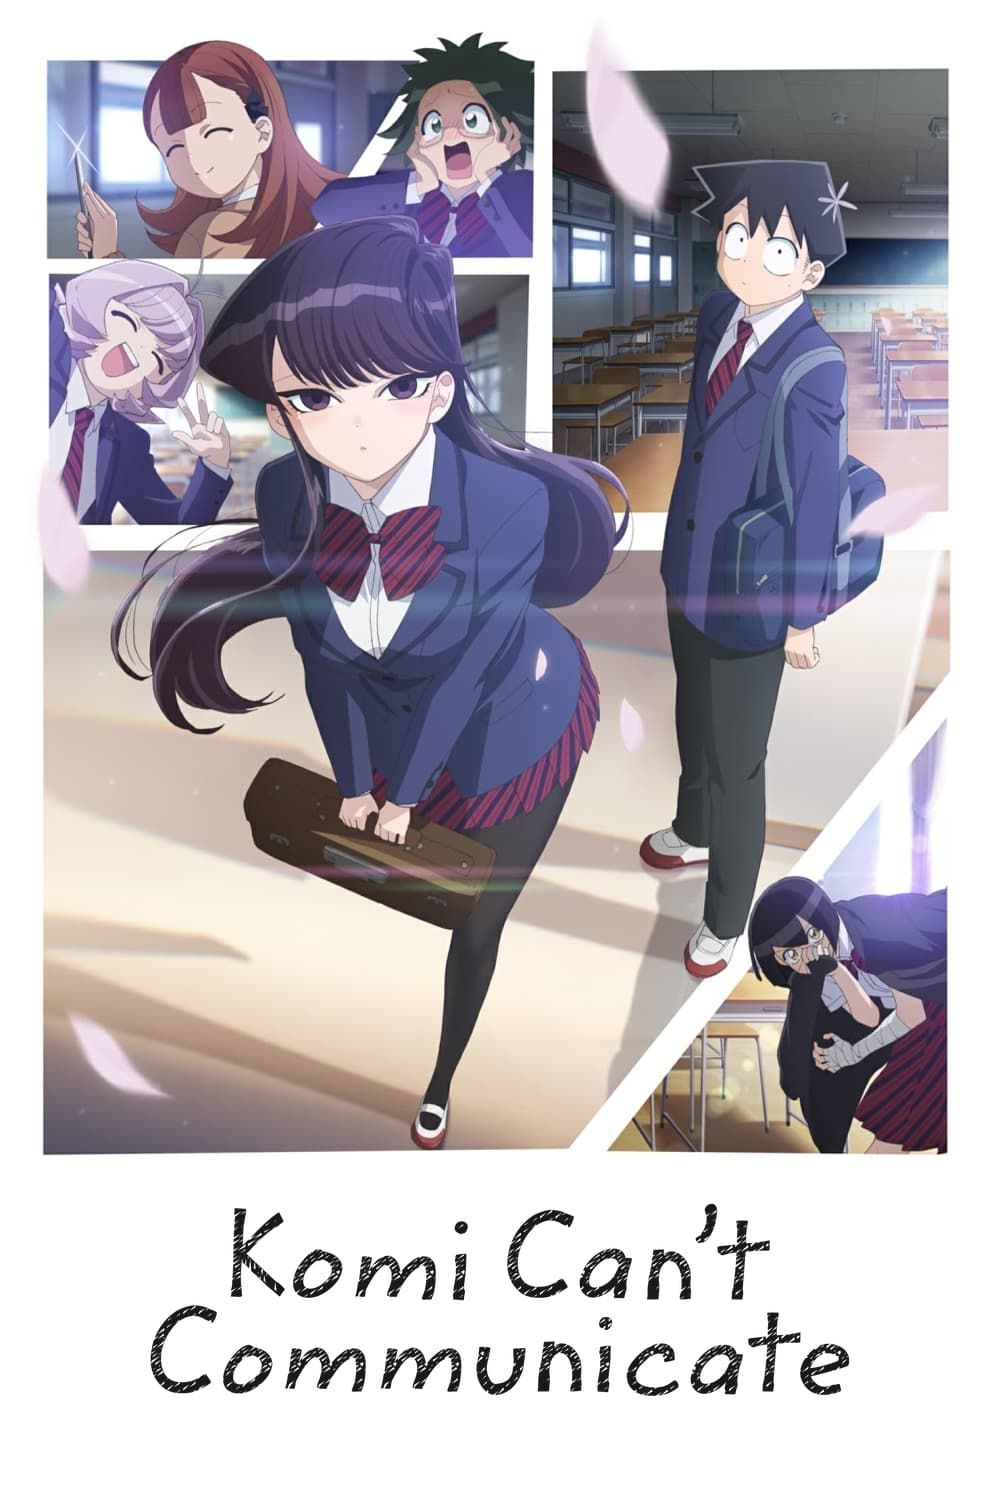 Komi smiling on the cover of the Komi Can't Communicate Anime Poster